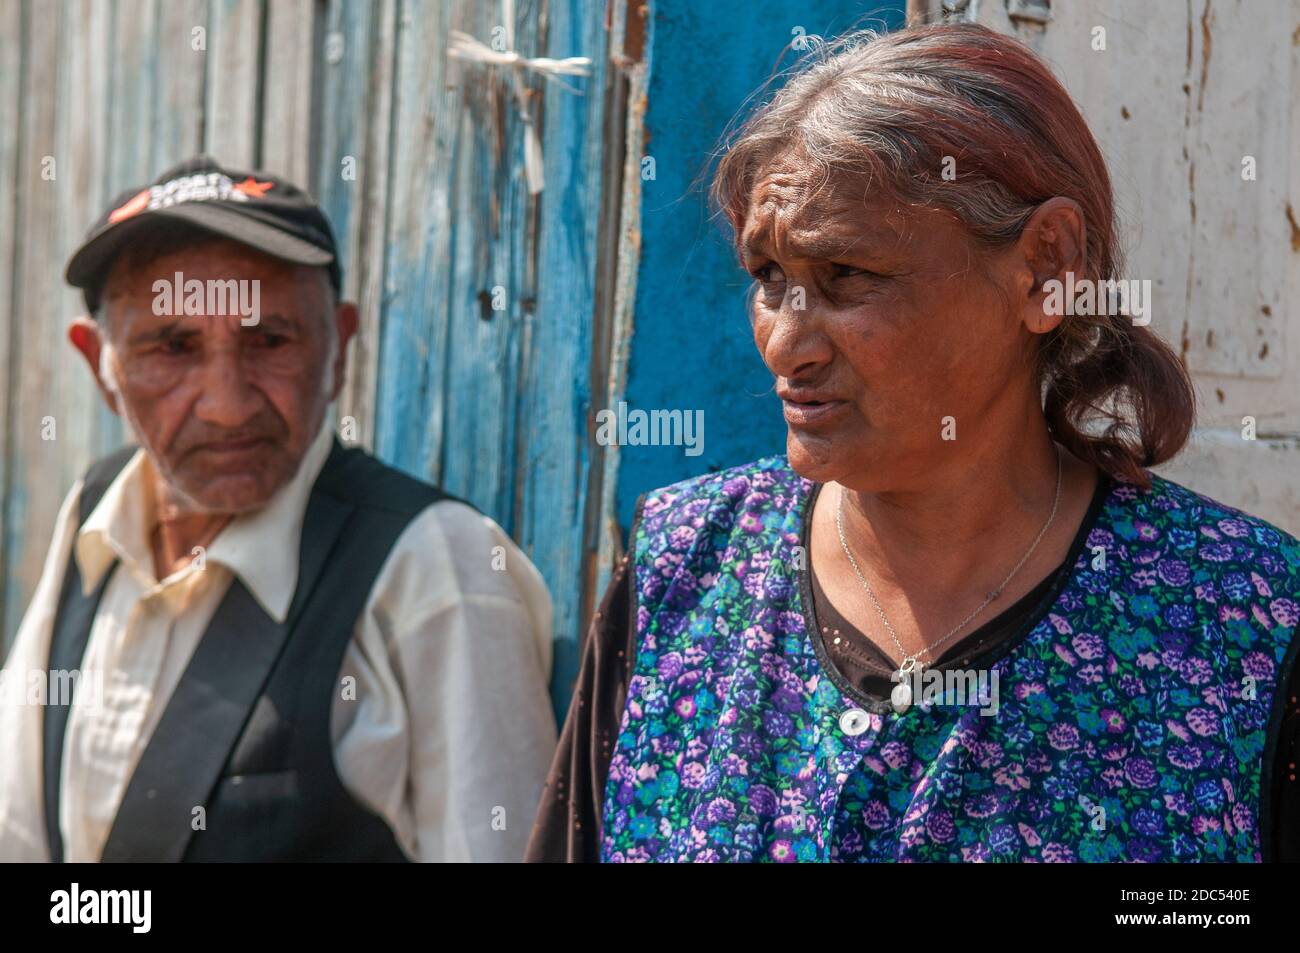 5/16/2018. Lomnicka, Slovakia. Roma or Gypsy community in the heart of Slovakia, living in horrible conditions. They suffer for poverty, stigma and lu Stock Photo